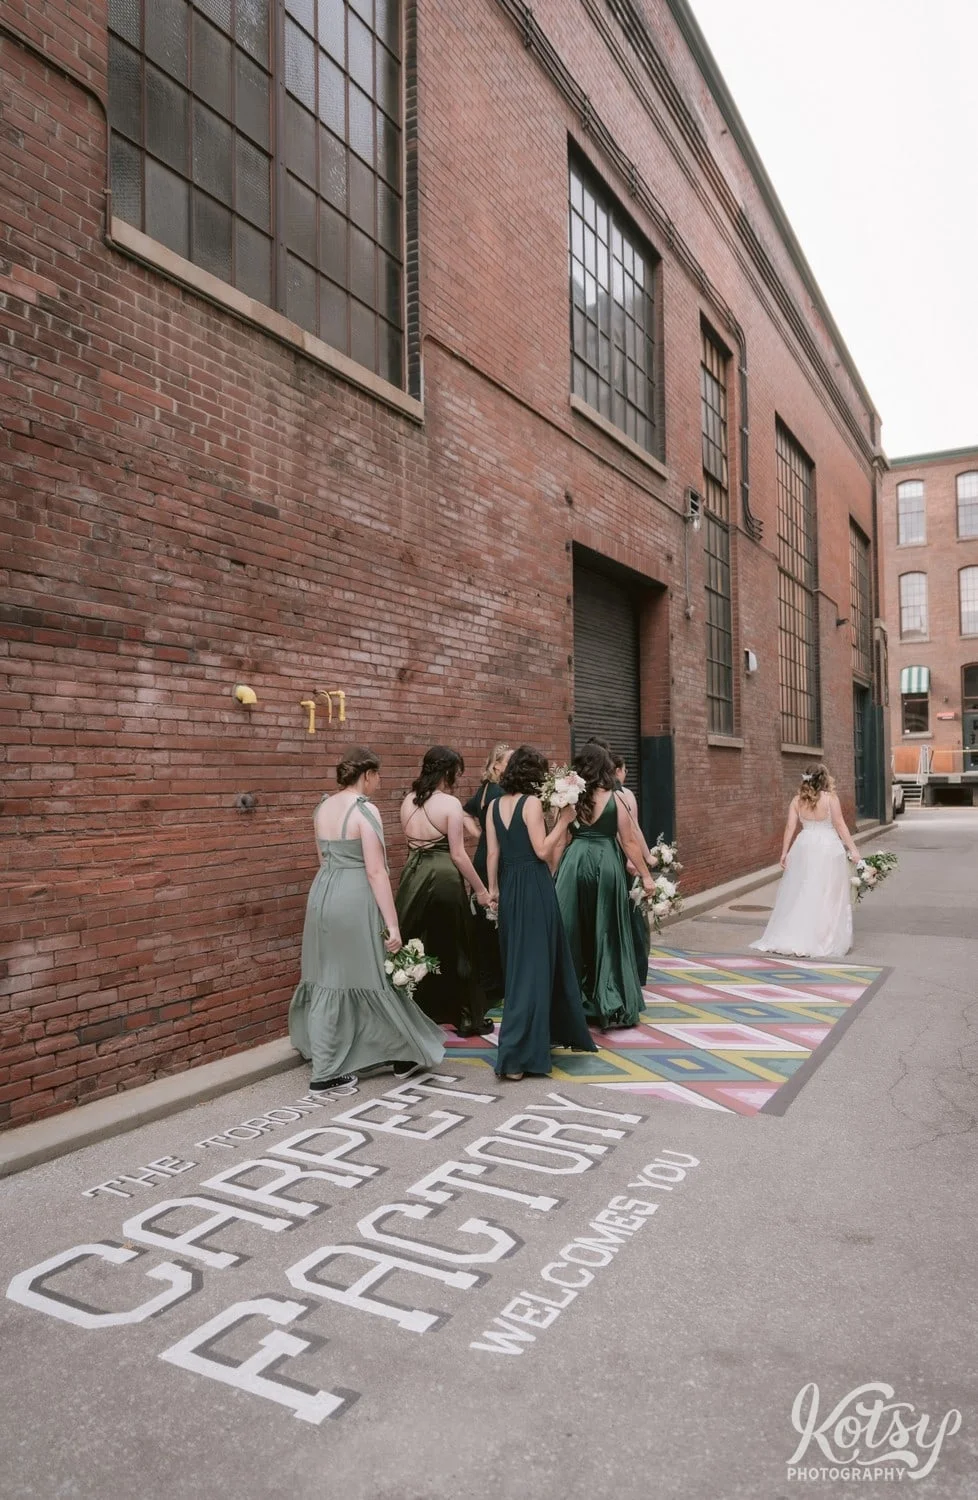 A shot of a bride wearing a white bridal gown holding a flower bouquet walks in front of her bridesmaids in green dresses over a carpet factory logo painted on the ground in Toronto Canada